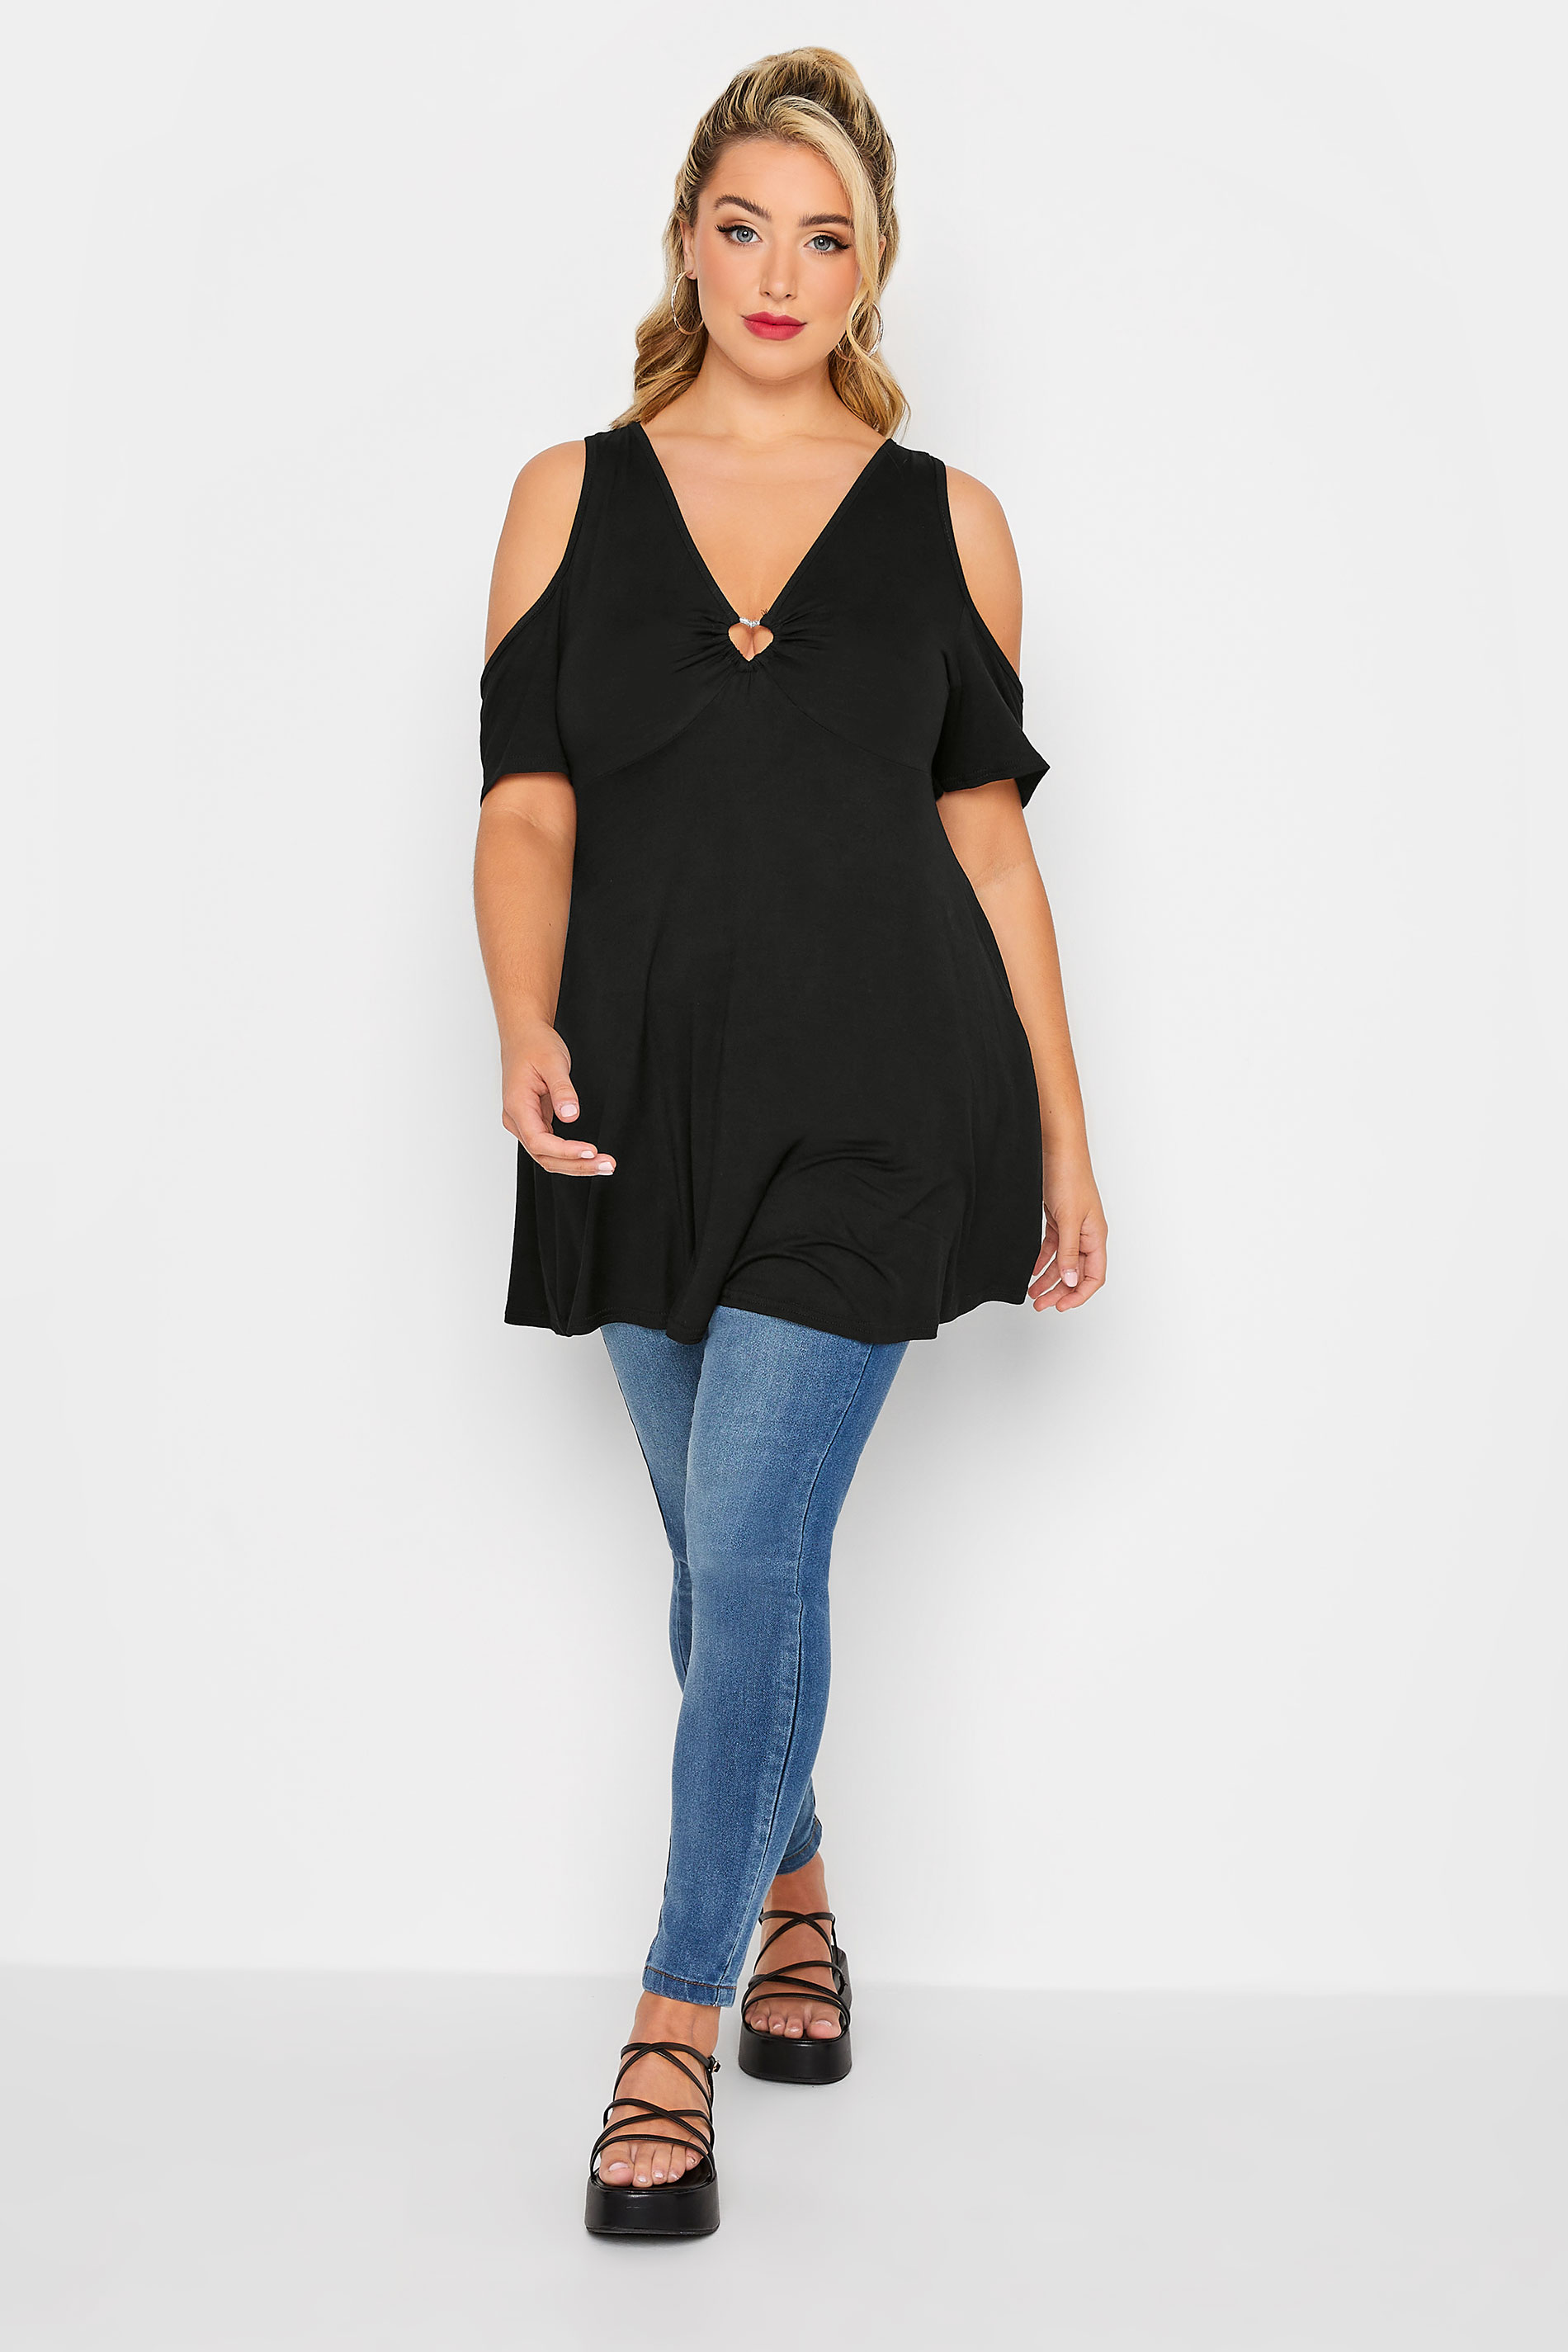 LIMITED COLLECTION Plus Size Curve Black Heart Trim Keyhole Short Sleeve Top | Yours Clothing  2